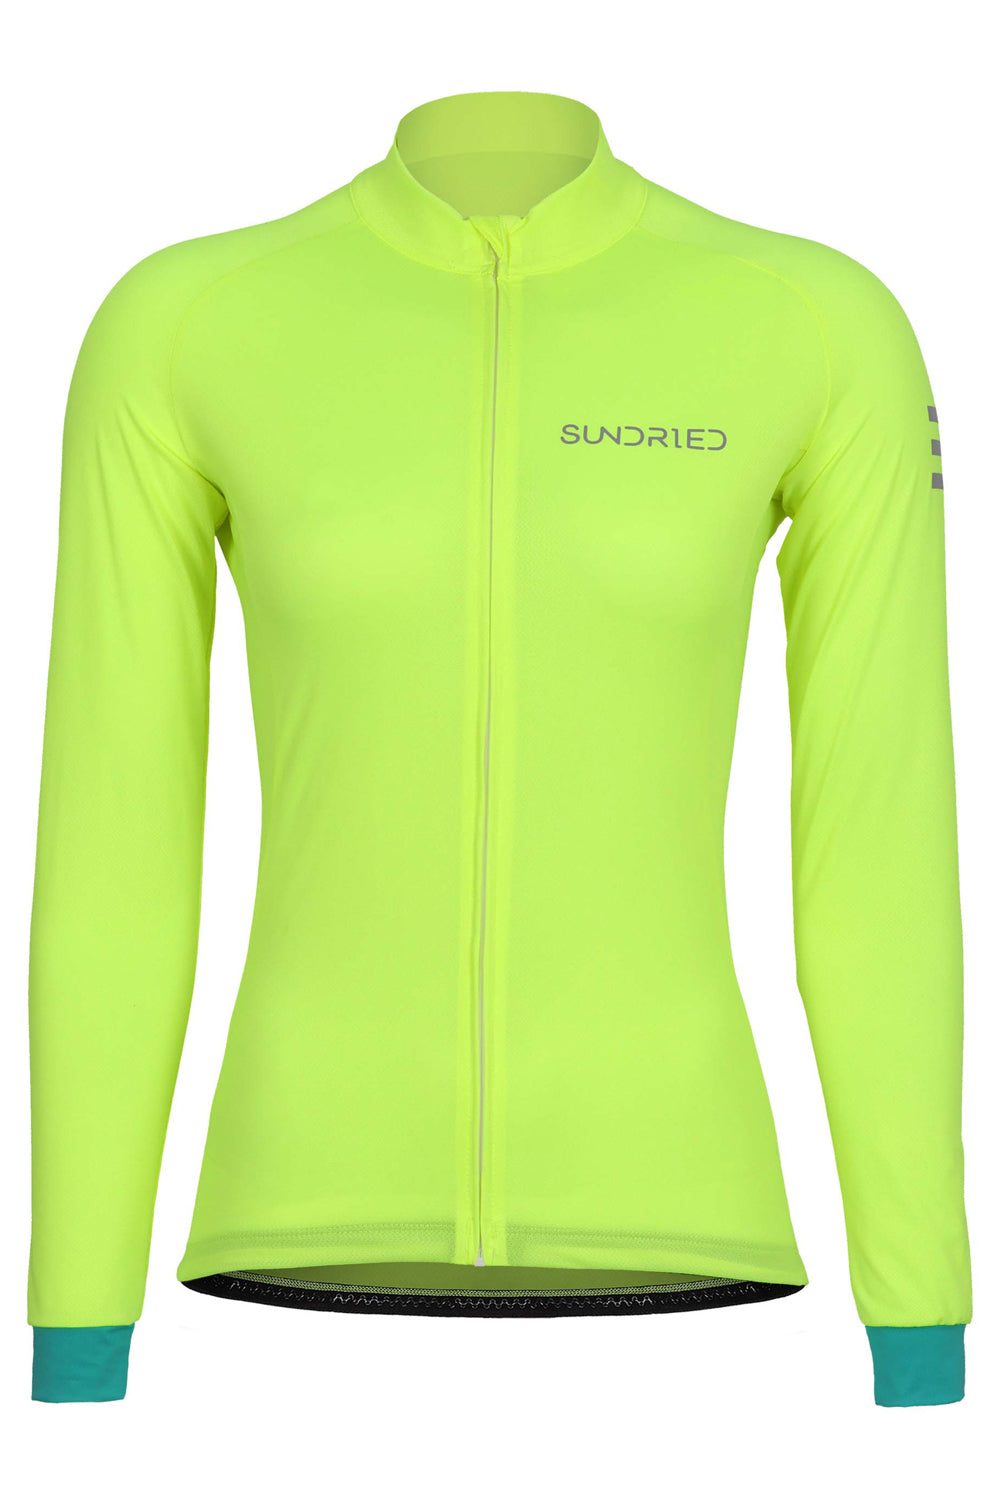 Sundried Apex Women's Long Sleeve Cycle Jersey Long Sleeve Jersey L Green SD0446 L Green Activewear